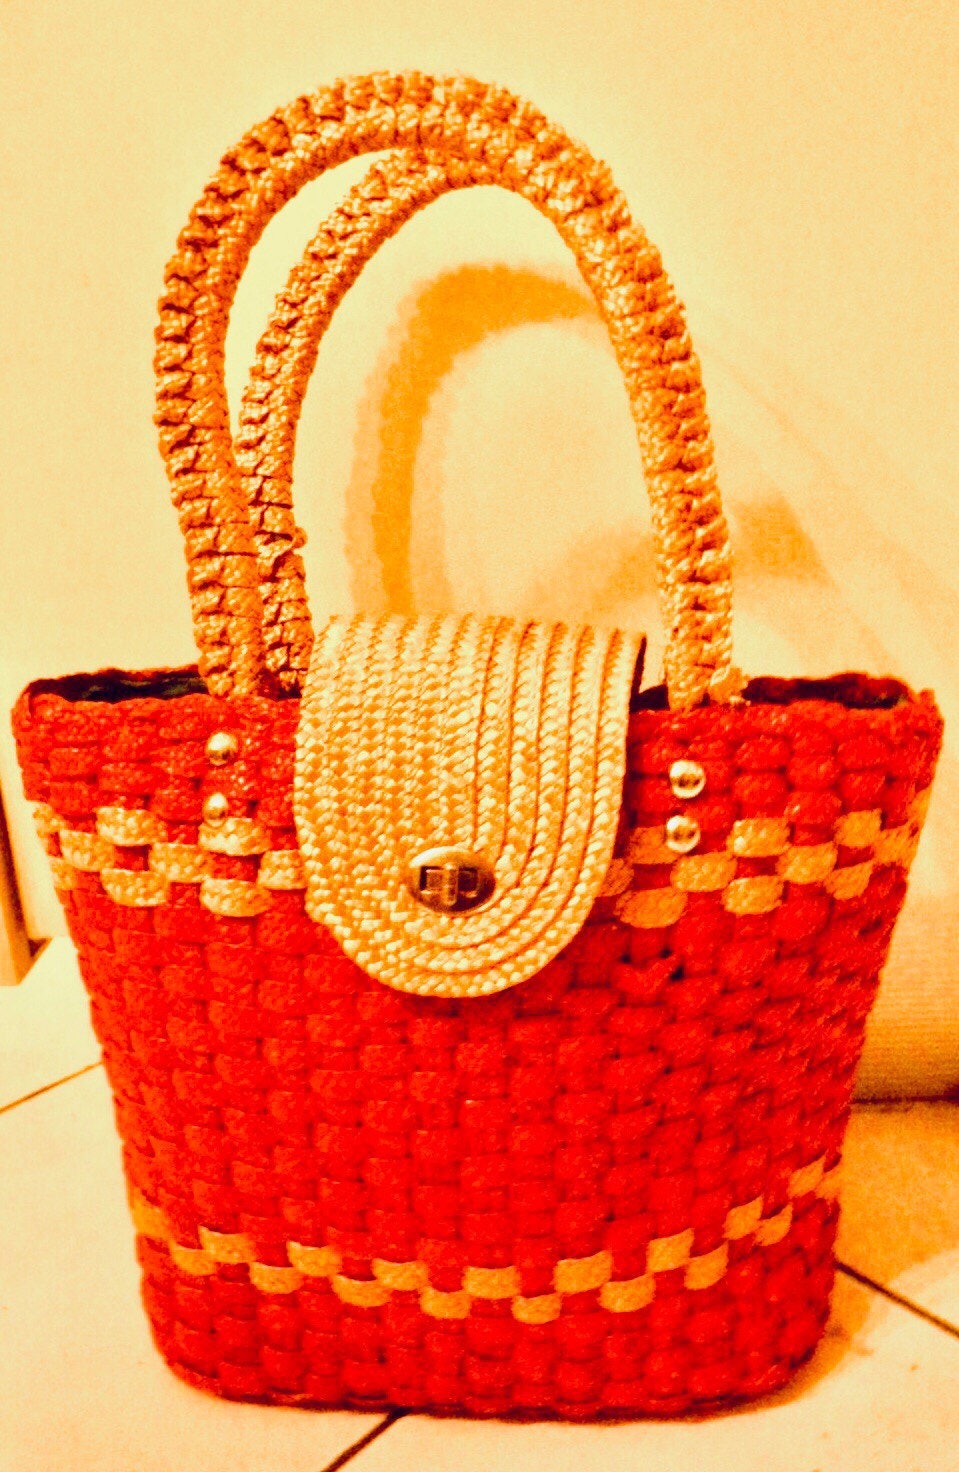 Large Square Wooden Handles Macramé Boho Braided Bag All Braided Coral Pink